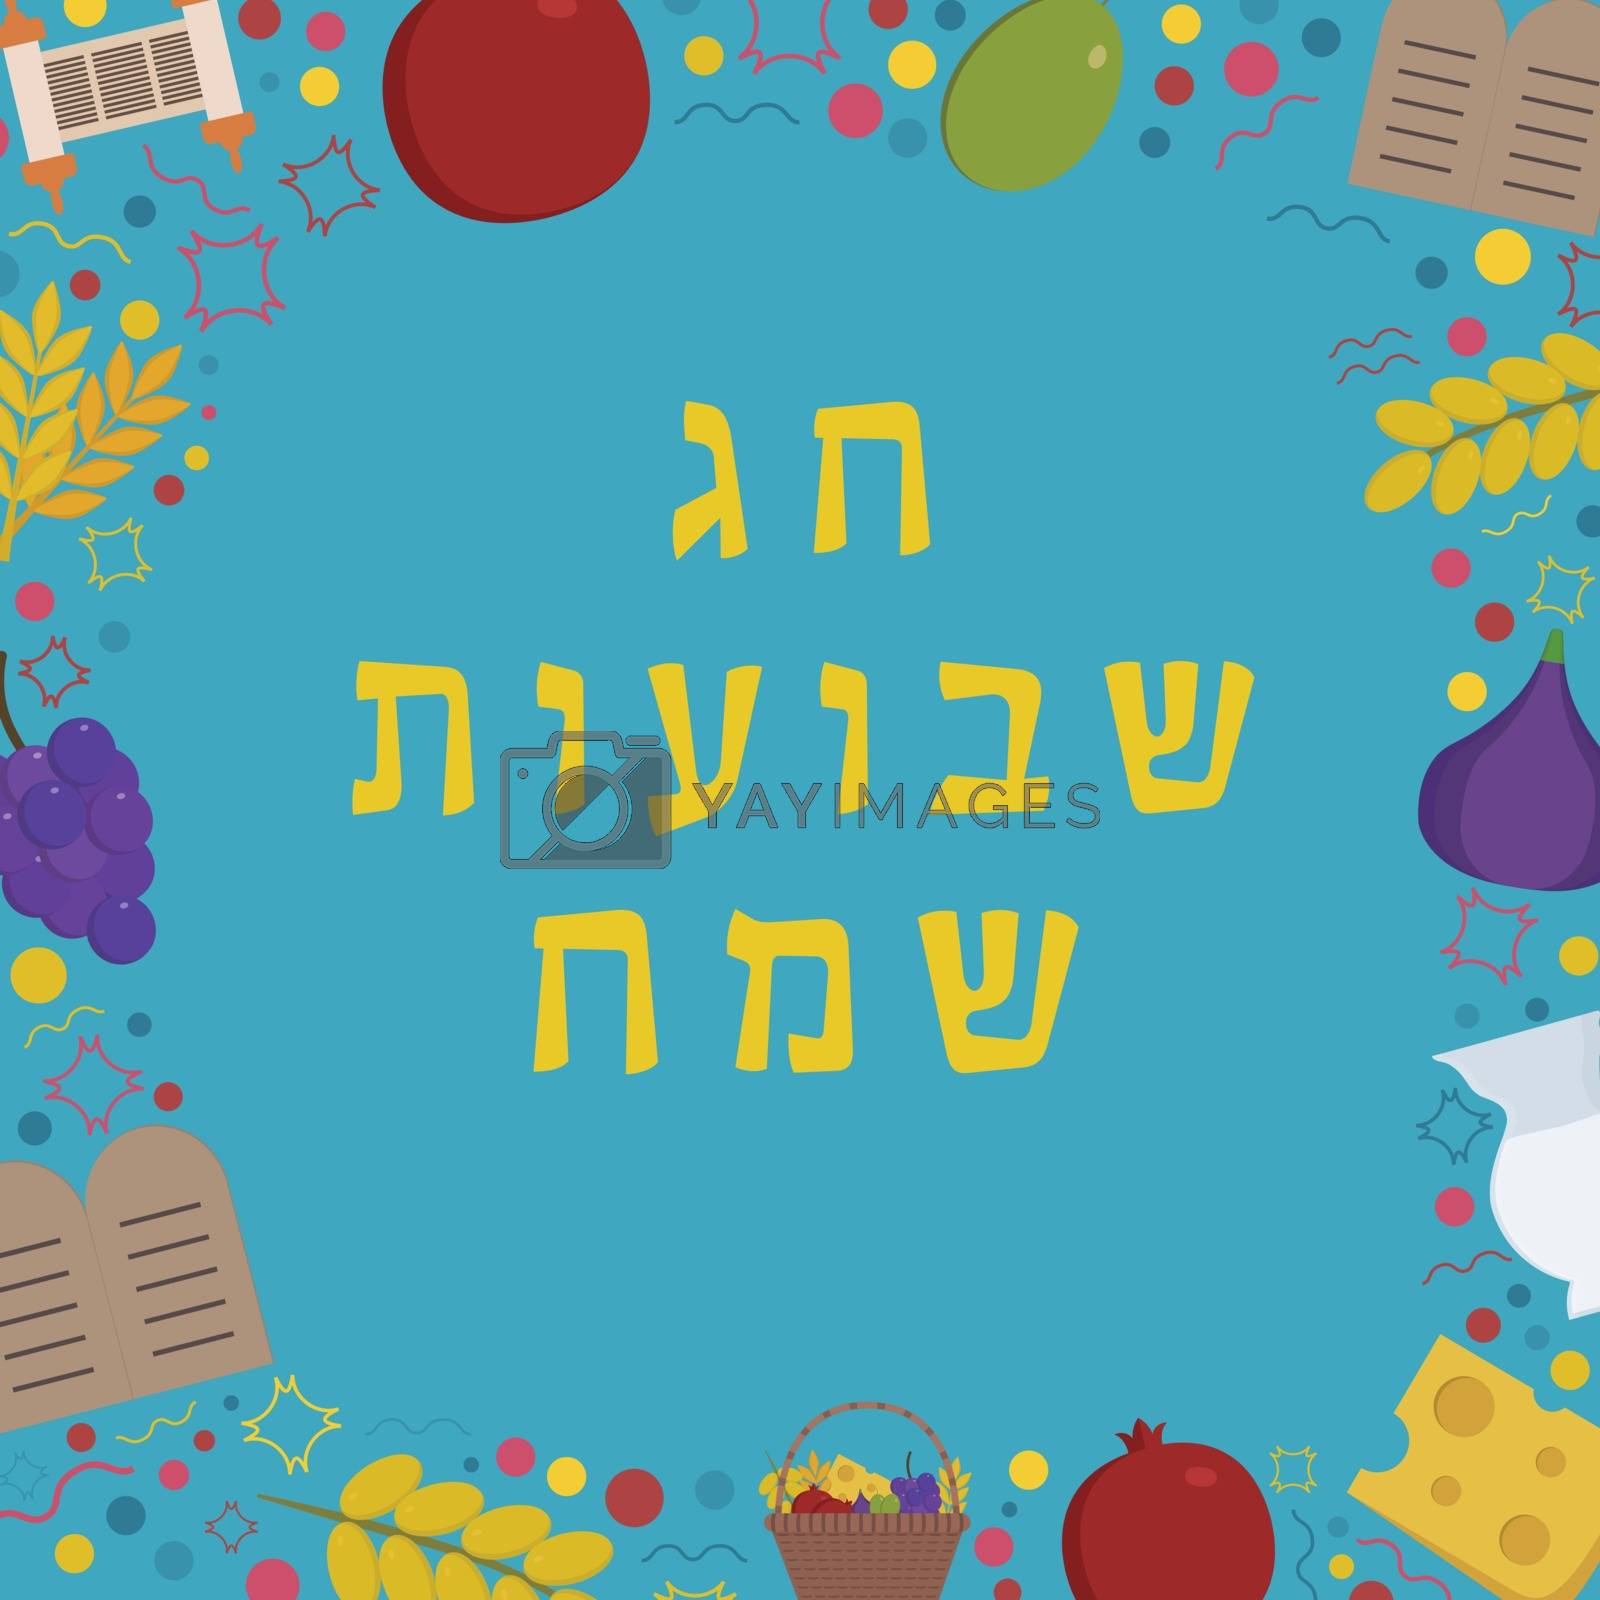 Royalty free image of Frame with Shavuot holiday flat design icons with text in hebrew by wavemovies